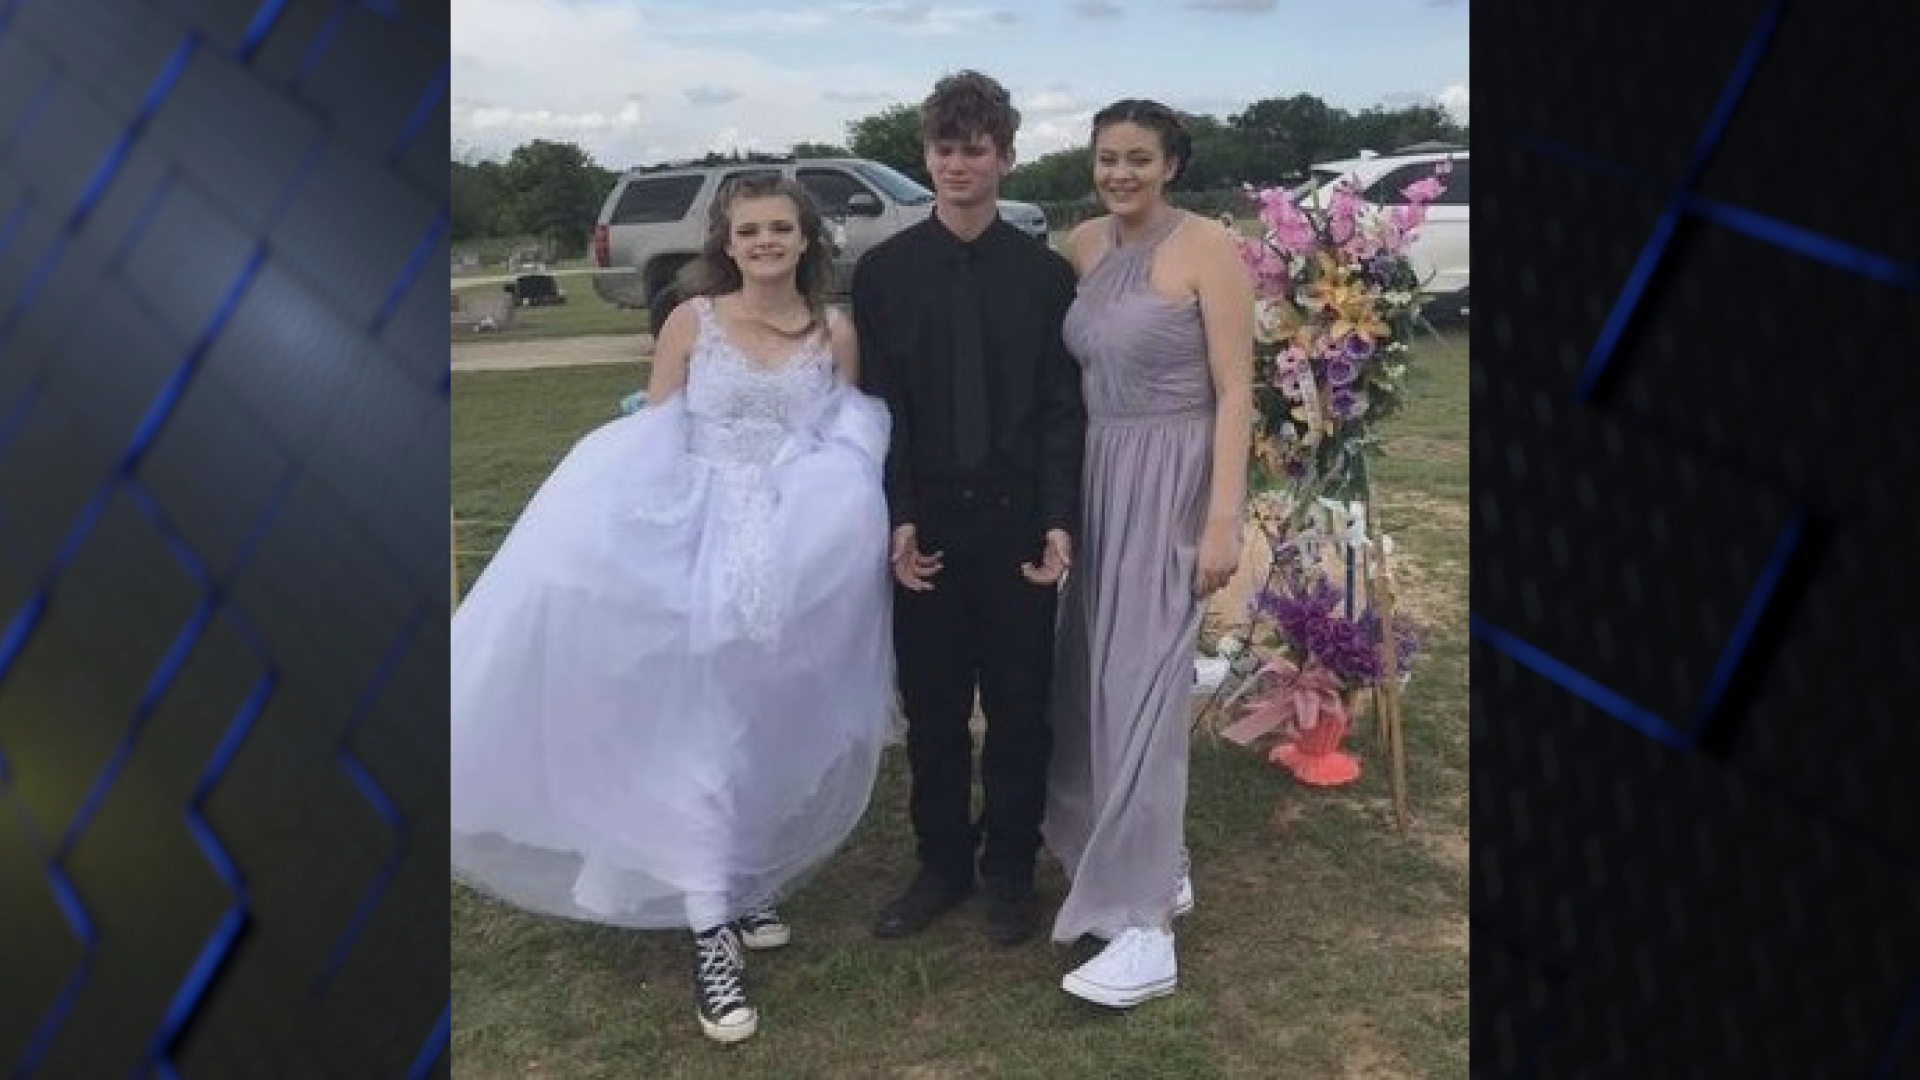 Students denied entry to prom over shoes